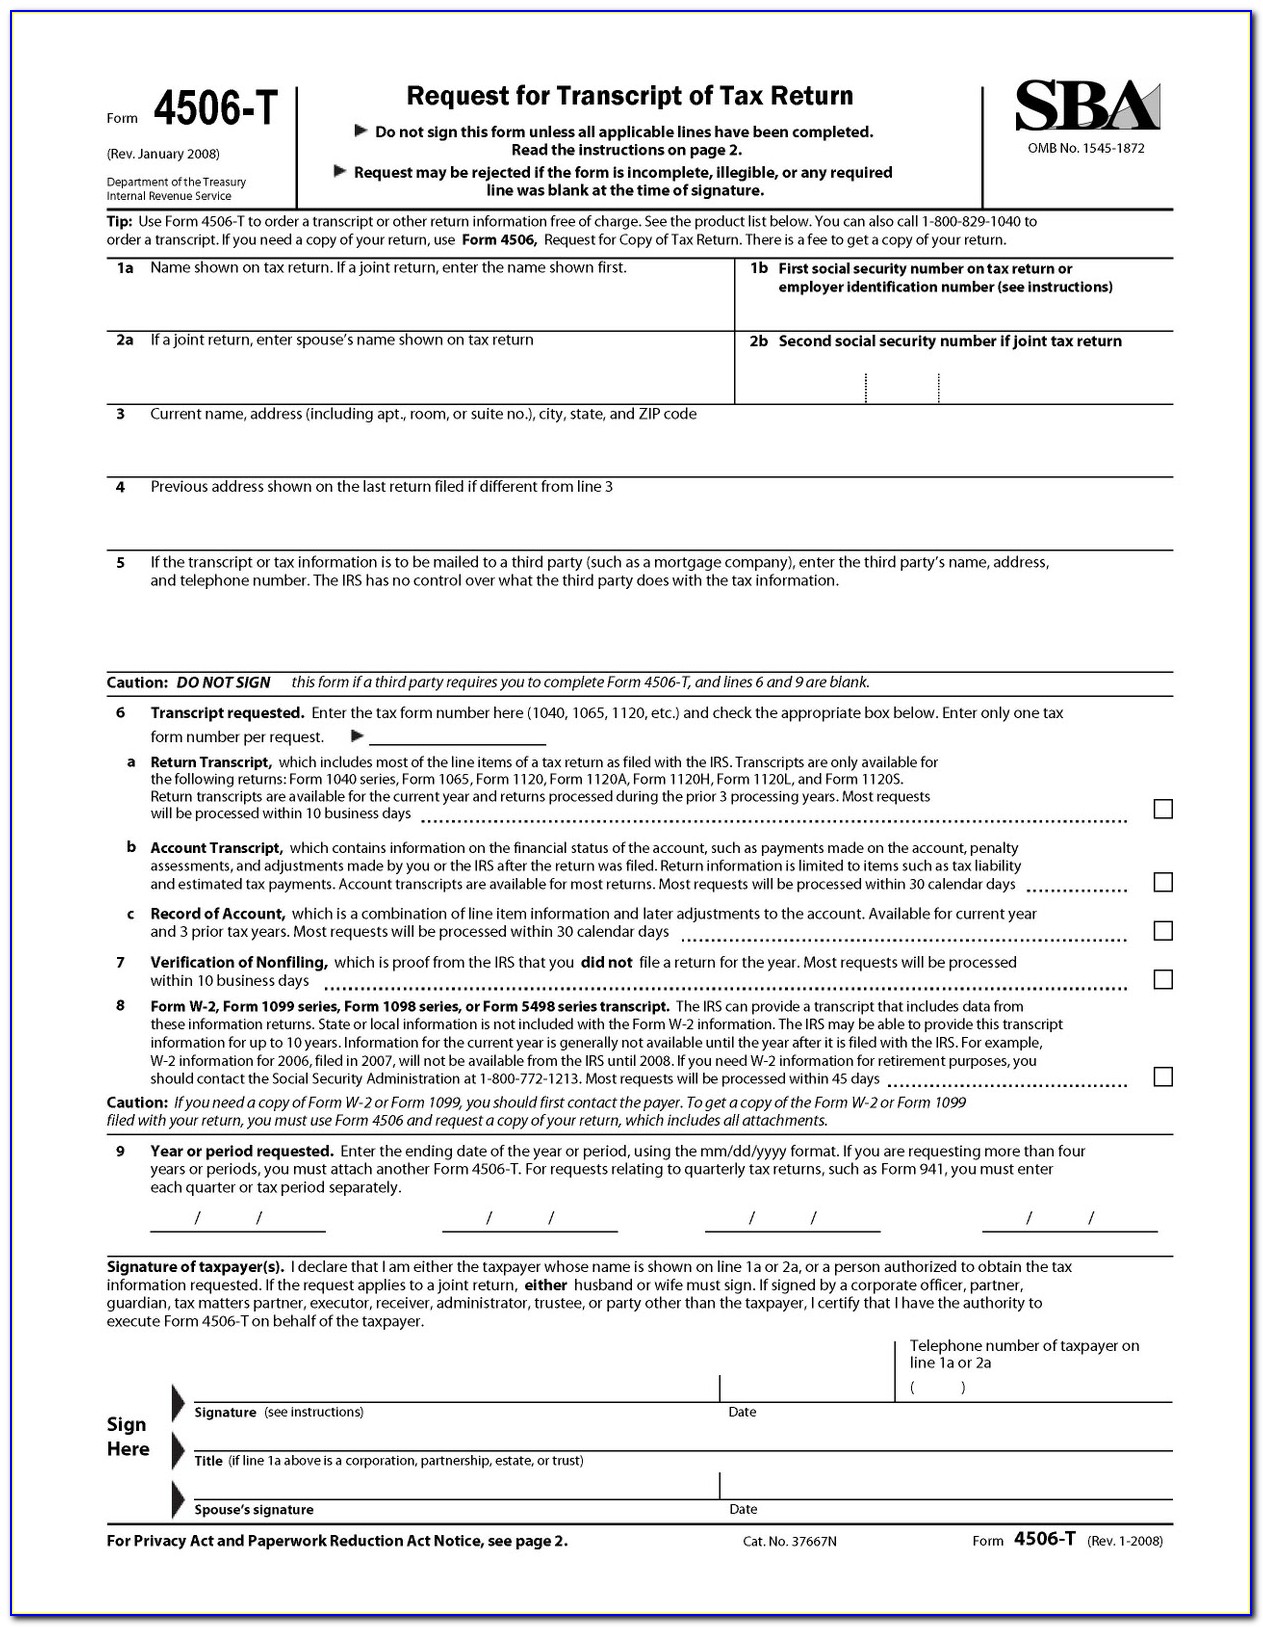 Chase Mortgage Form 4506 T